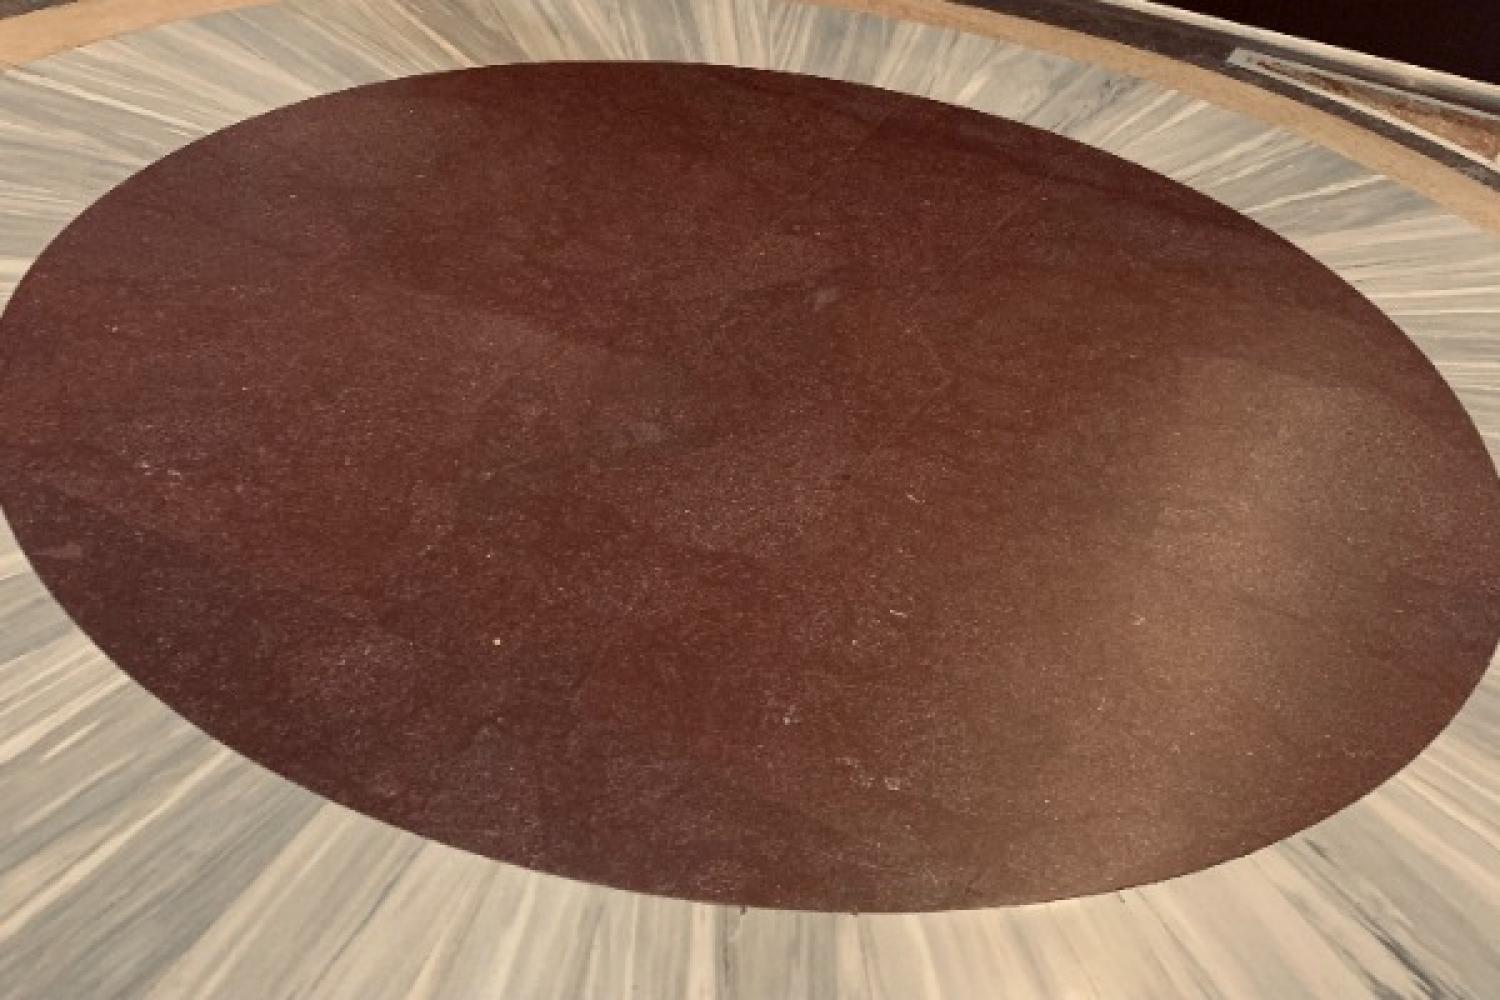 The porphyry disk in St. Peter&#039;s Basilica, on which Charlemagne was crowned Holy Roman Emperor and countless Christian pilgrims have walked.